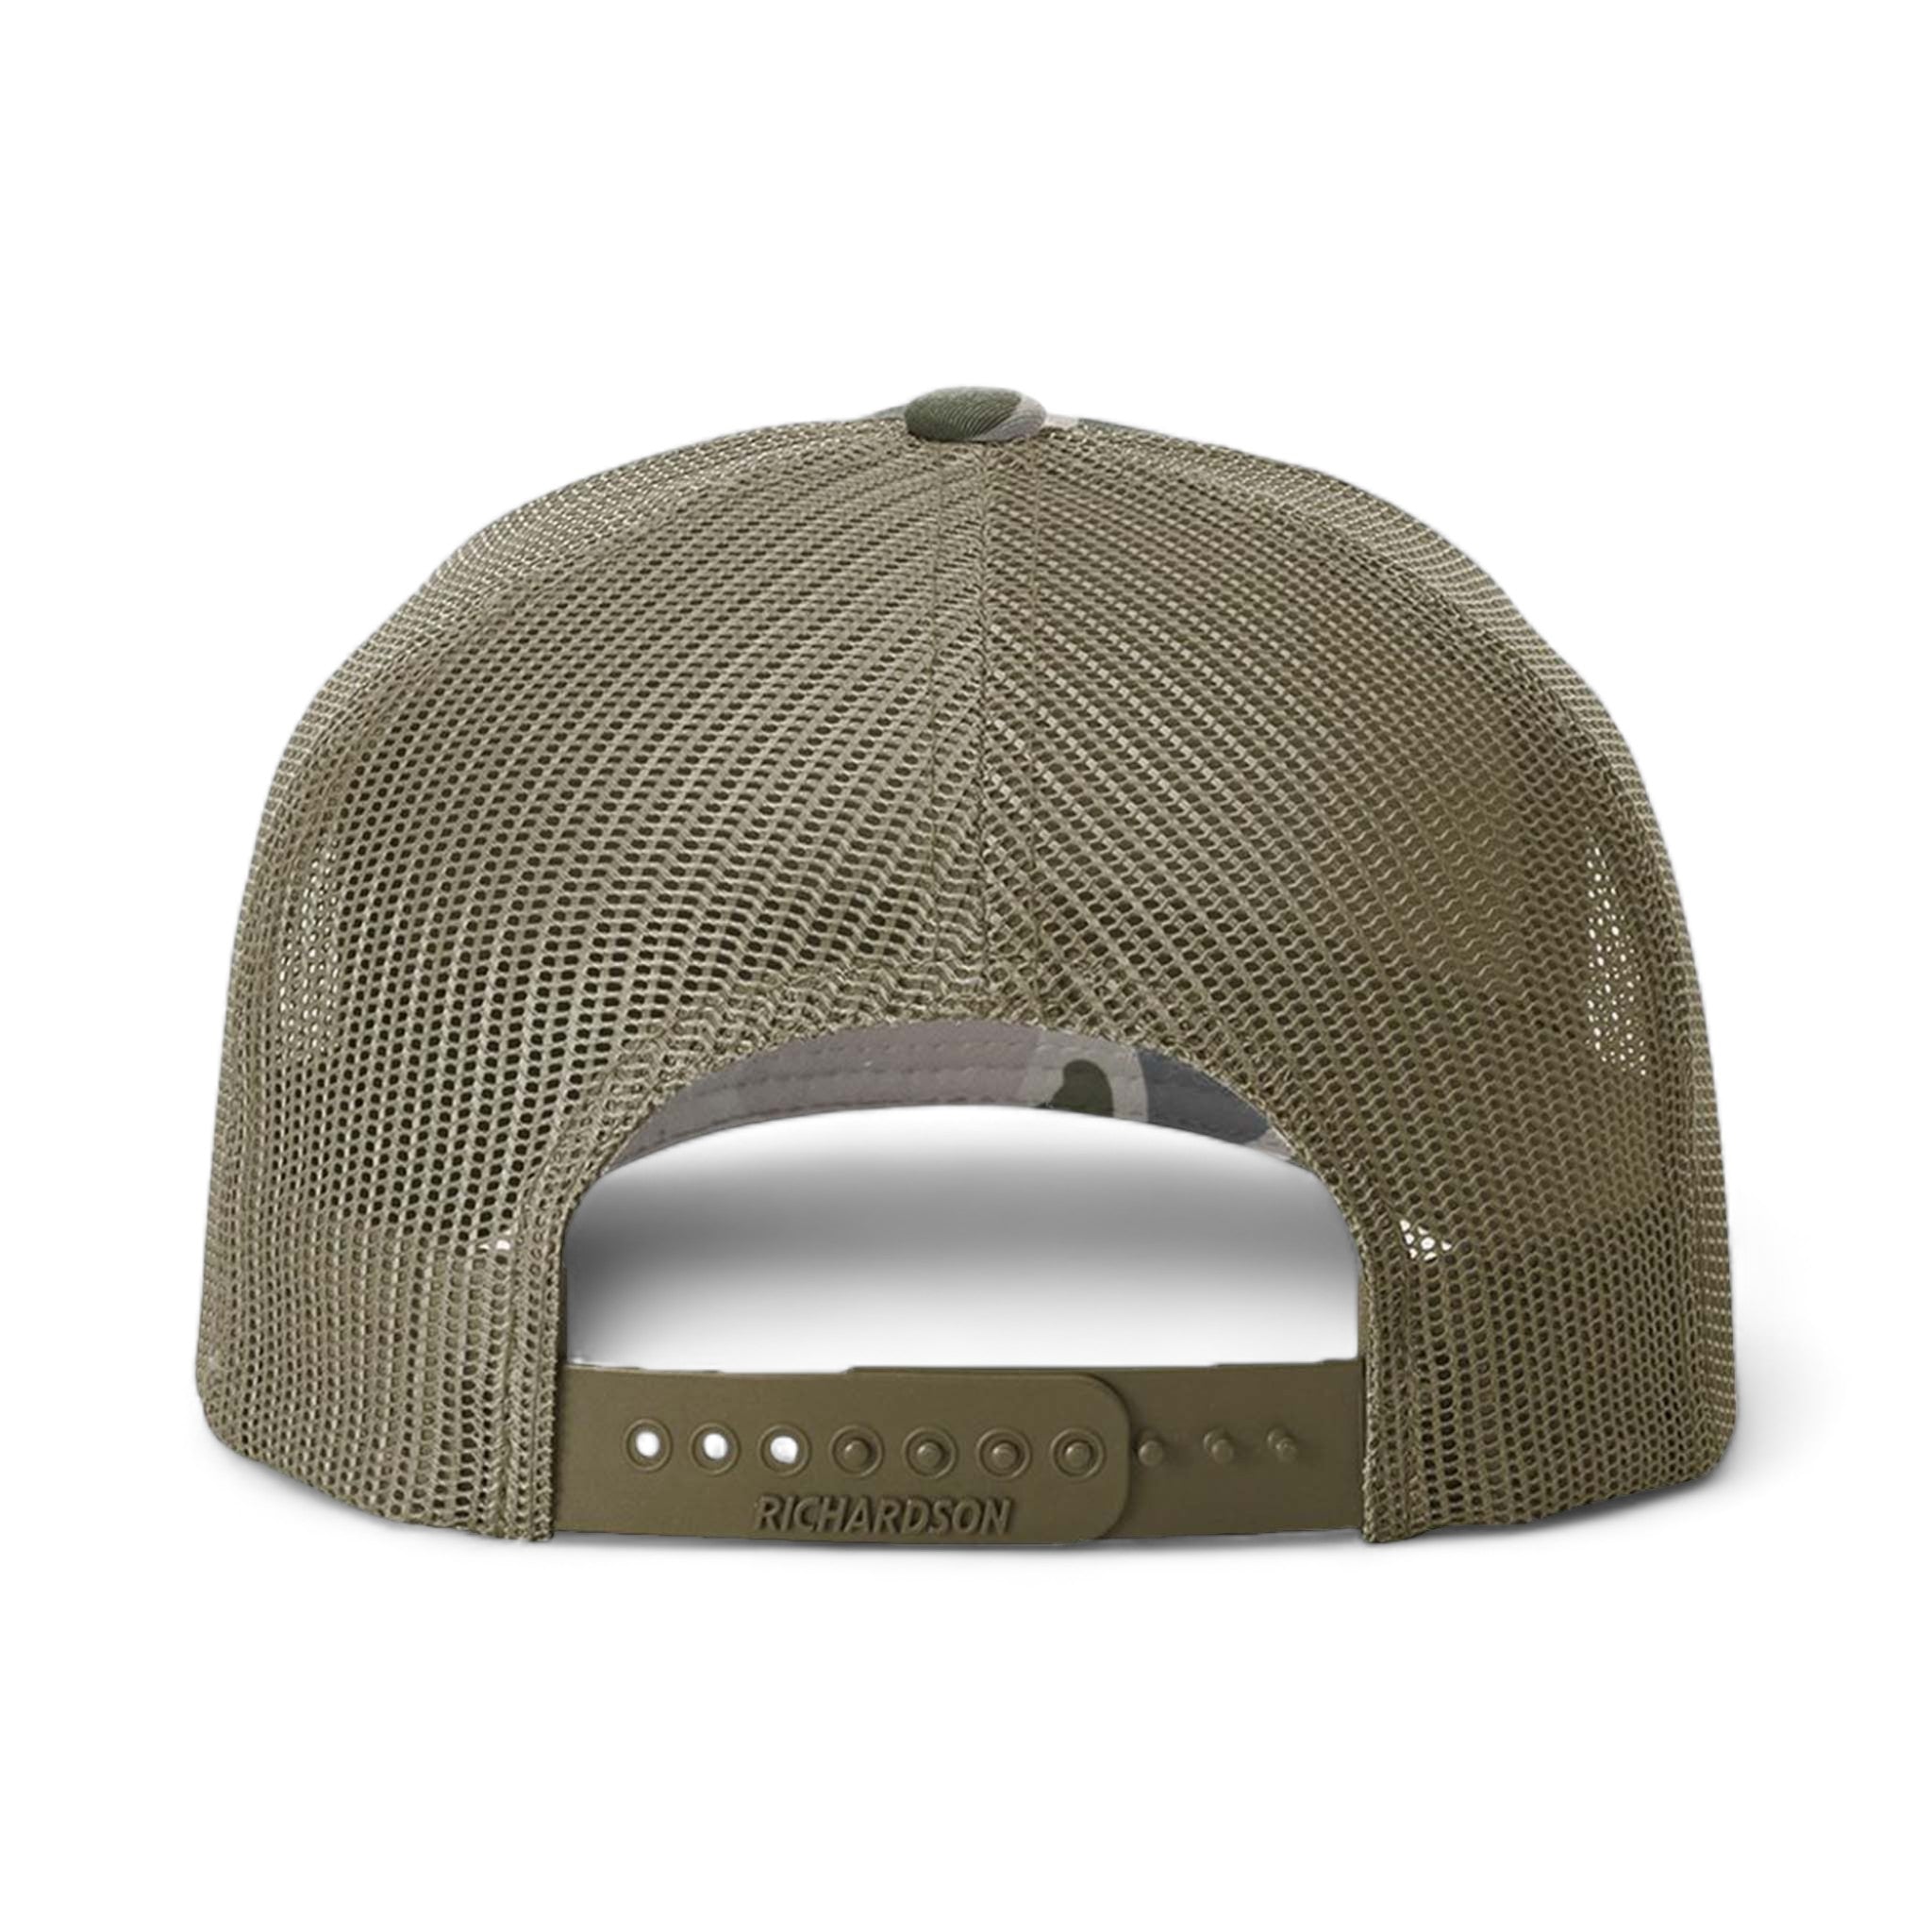 Back view of Richardson 112PFP custom hat in marsh duck camo and loden